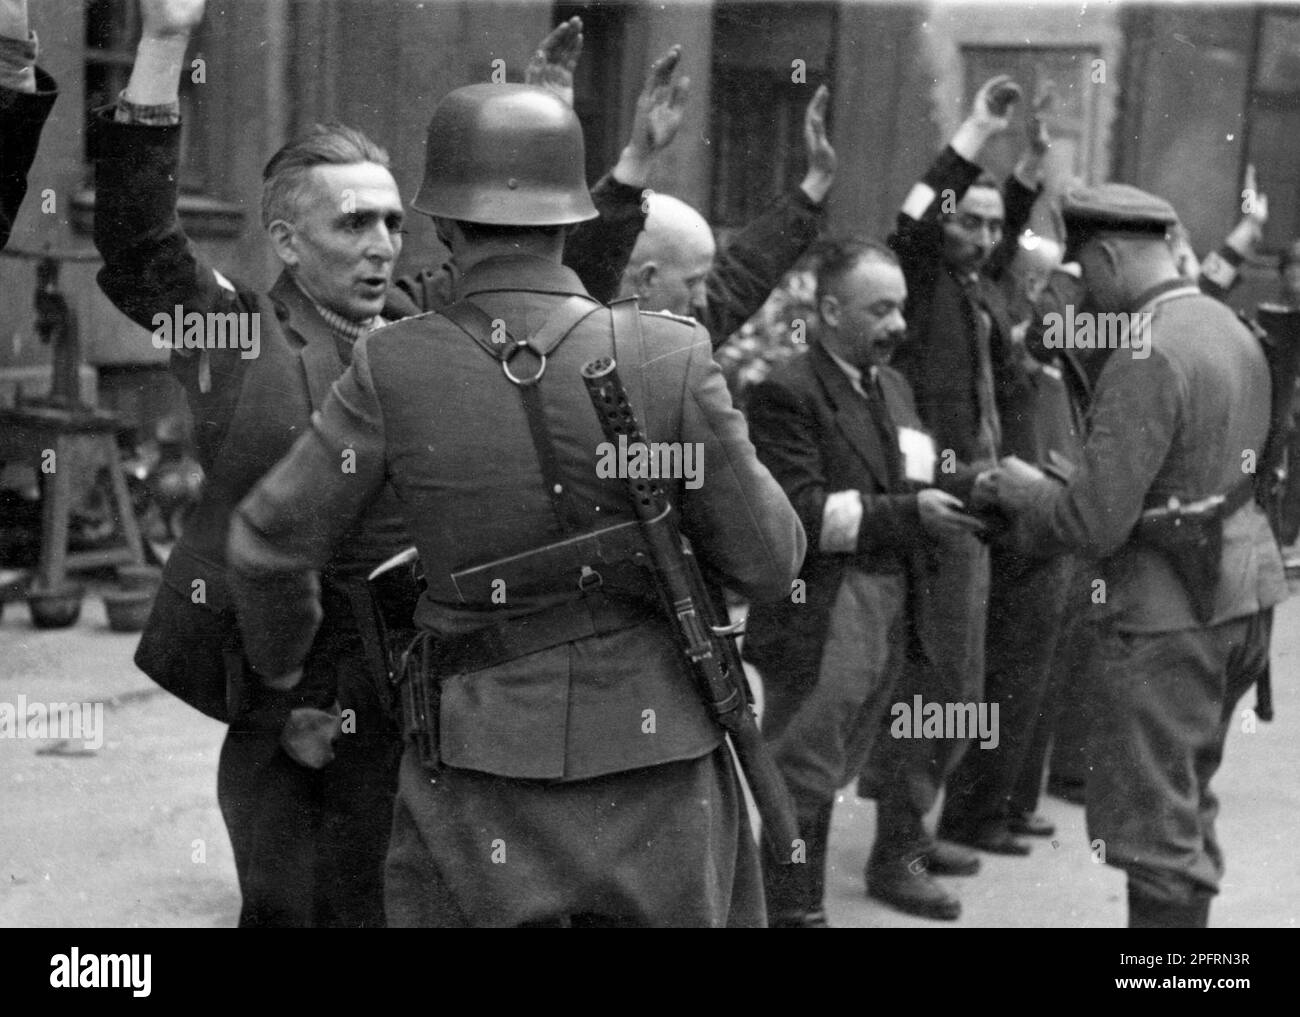 In January 1943 the nazis arrived to round up the Jews of the Warsaw Ghetto  The Jews, resolved to fight it out, took on the SS with homemade and primitive weapons. The defenders were executed or deported and the Ghetto area was systematically demolished. This event is known as The Ghetto Uprising. This image shows a SS troops arresting the Jewish department heads of the Brauer helmet factory. The Brauer 'shop', of Herman Brouer, made helmets for the German Army and employed 2 thousand people. Their workers were probably of the last Jews to be deported from the ghetto. This image is from the G Stock Photo